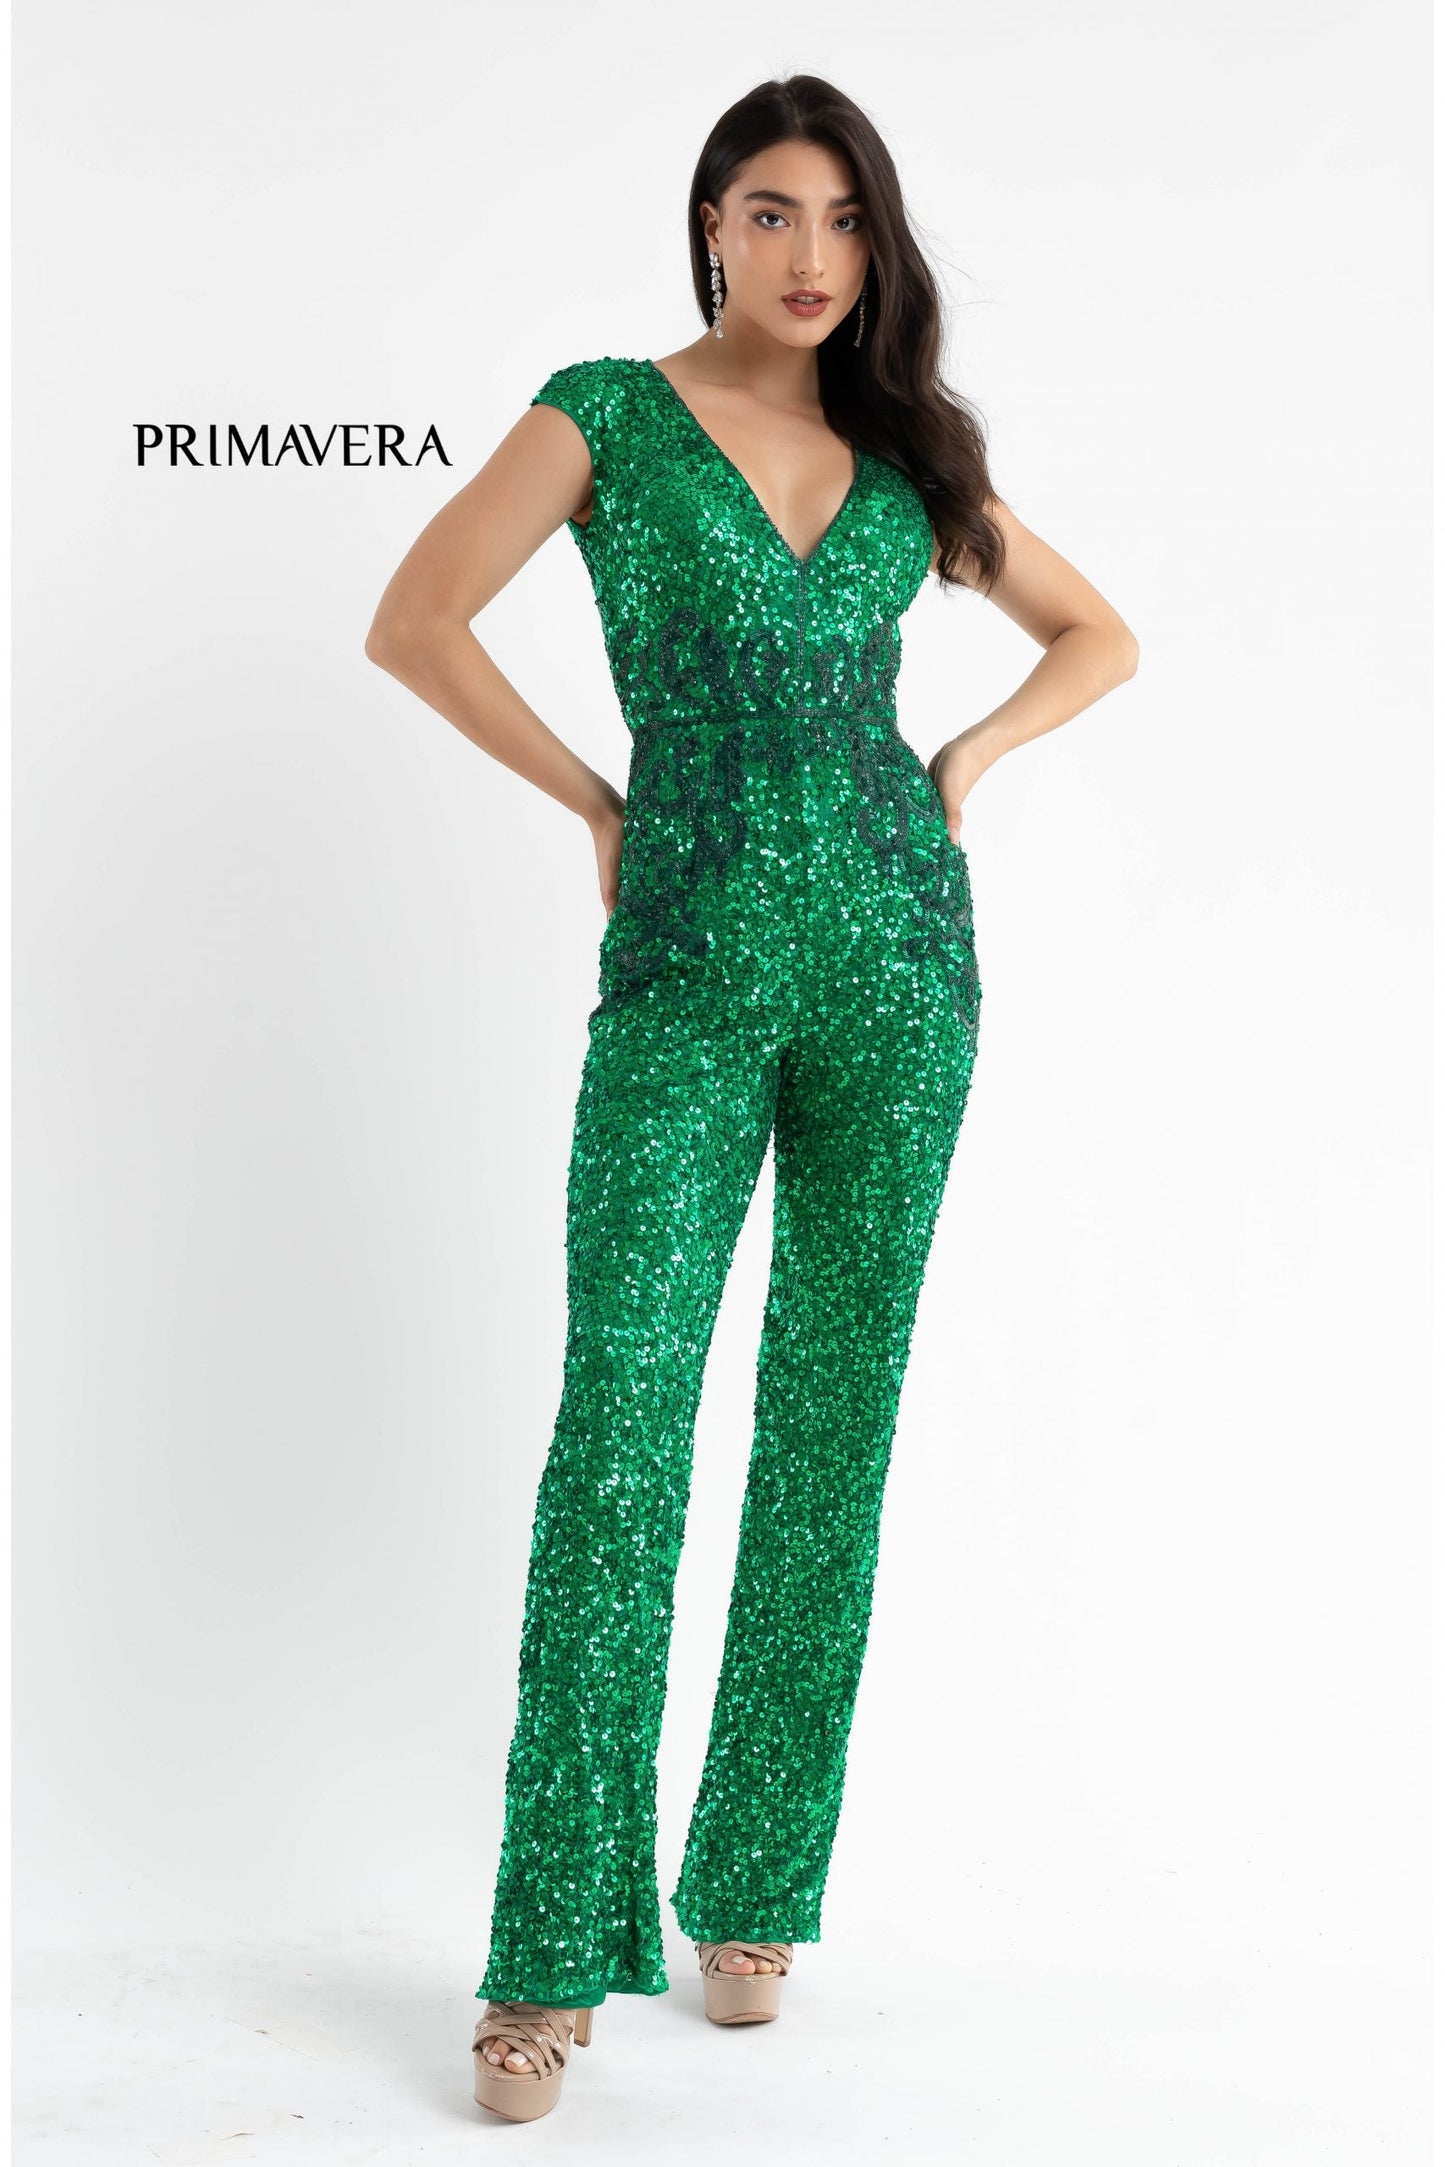 Primavera Couture 3775 Size 12 Turquoise Sequined Jumpsuit Beaded Waist and Hips Cap Sleeves